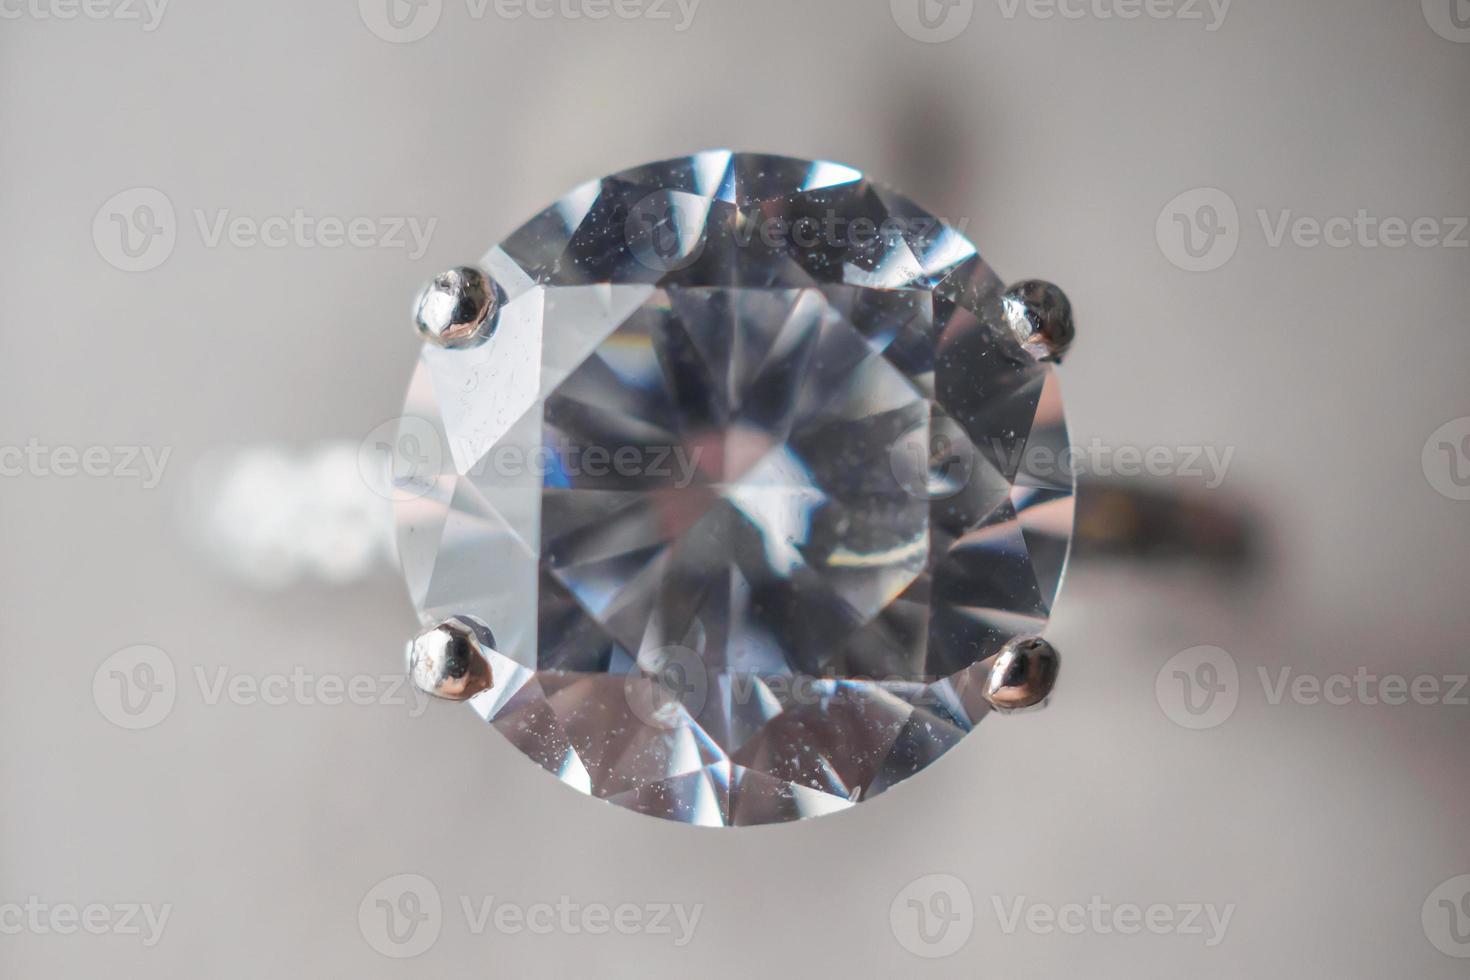 Diamond ring in jewelry gift box close up background photo